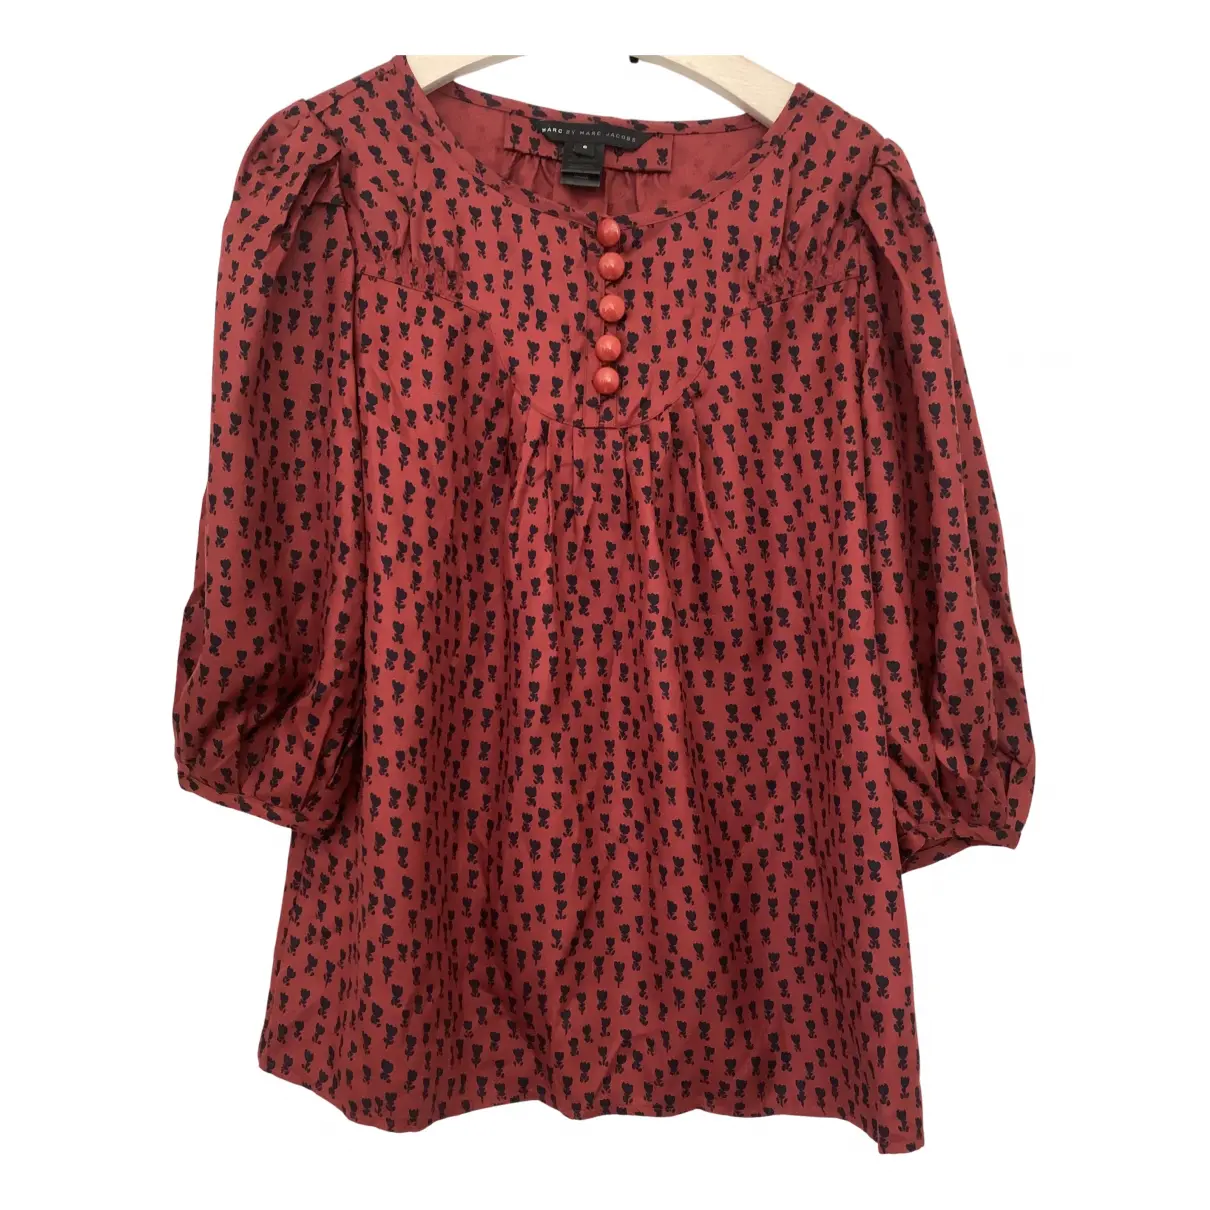 Silk top Marc by Marc Jacobs